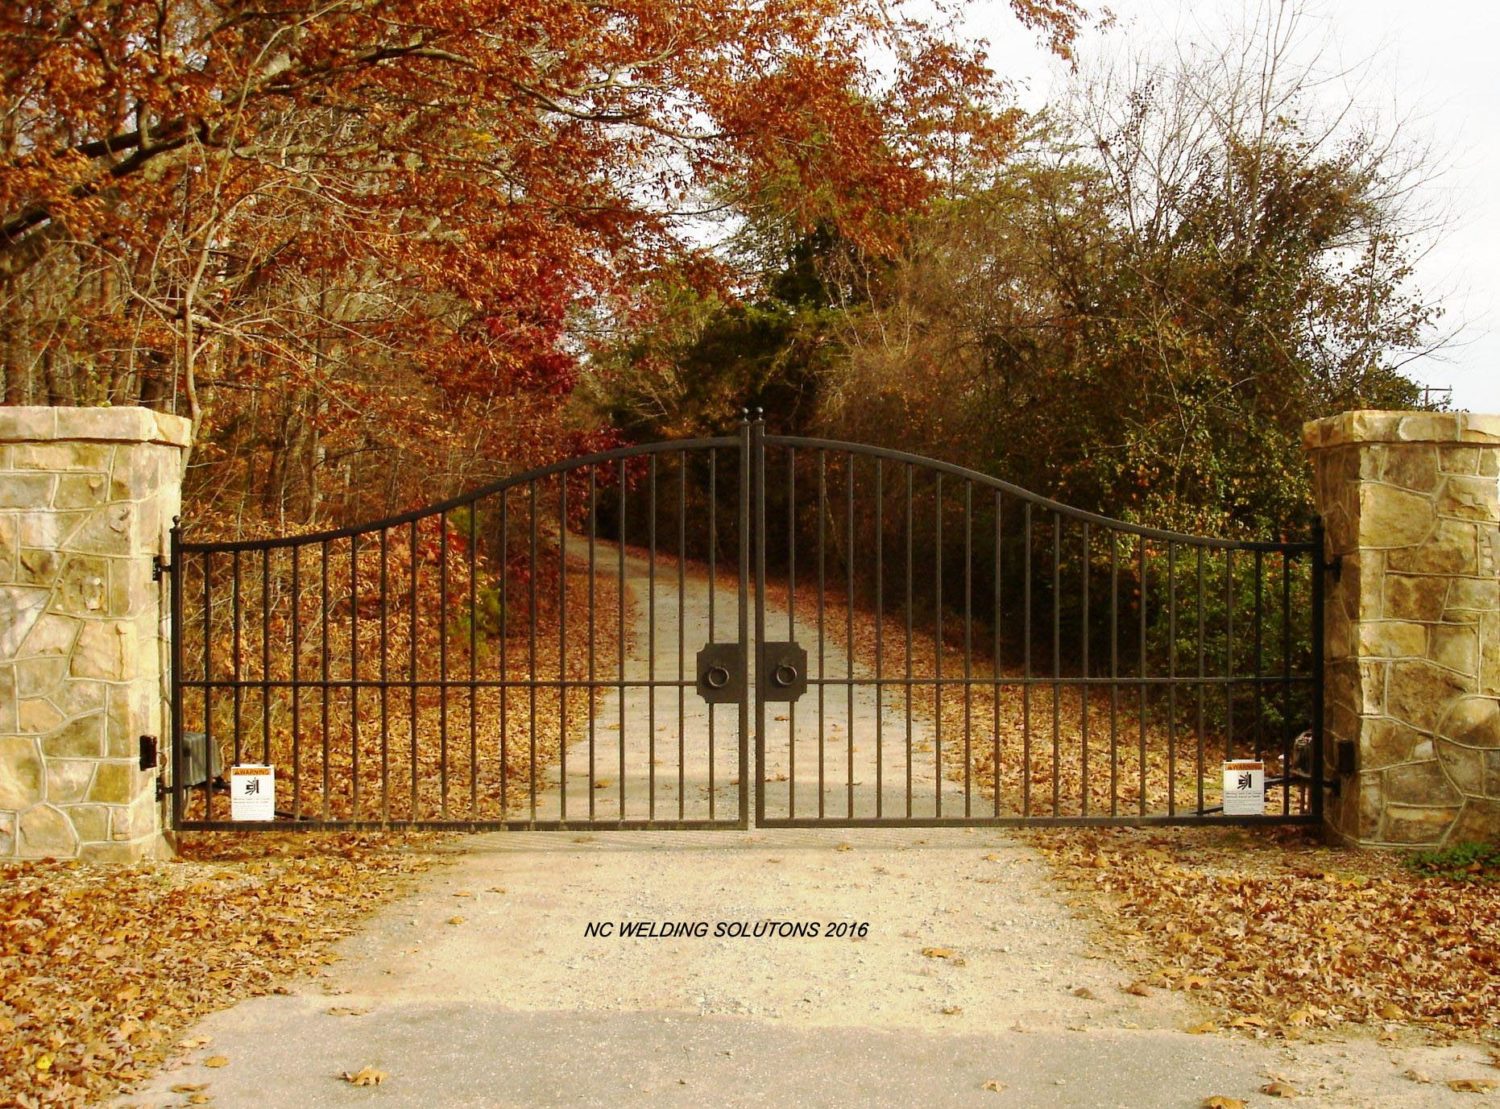 Custom Wrought Iron Driveway Gates Curved Hand Railings Gate Openers NC Welding Solutions